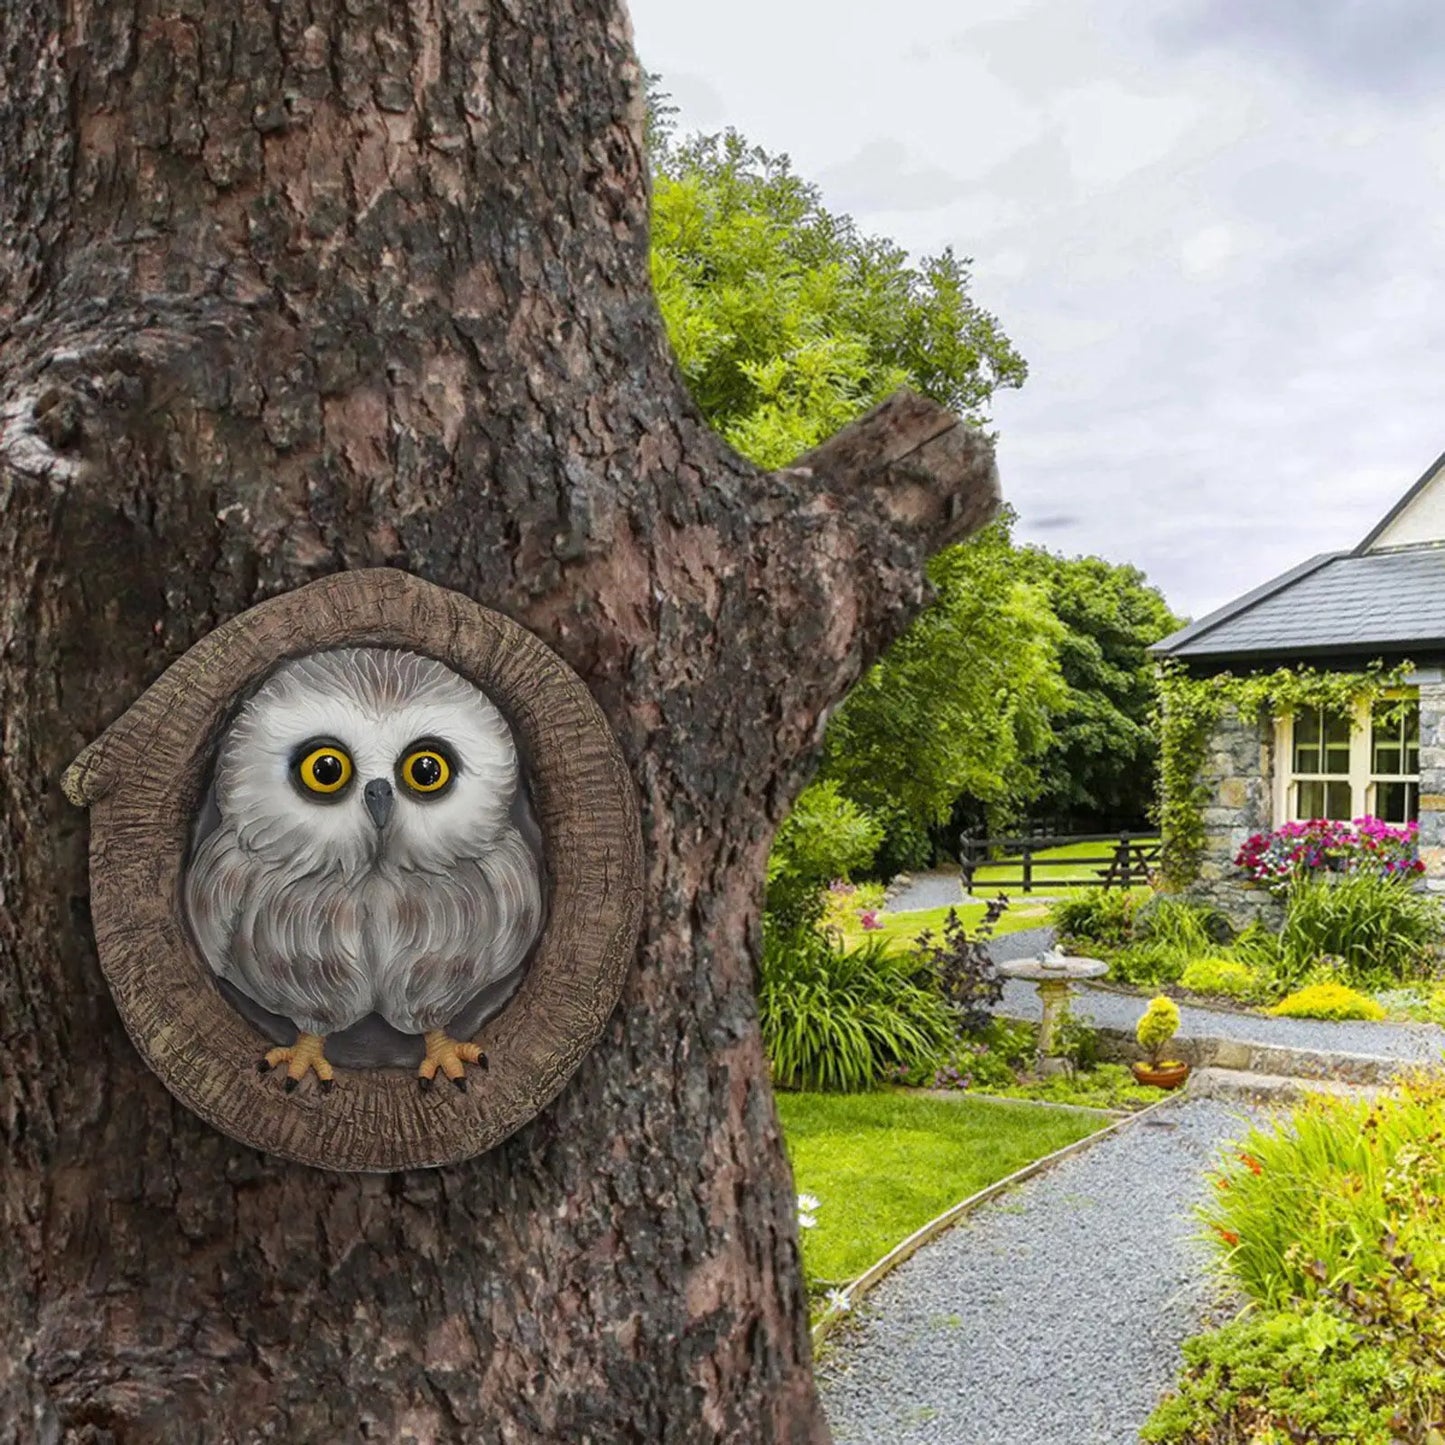 Owl Statue Garden Tree Decoration Hand Painted Water Resistant Gardening Art for Housewarming Gifts Easily Install Multipurpose